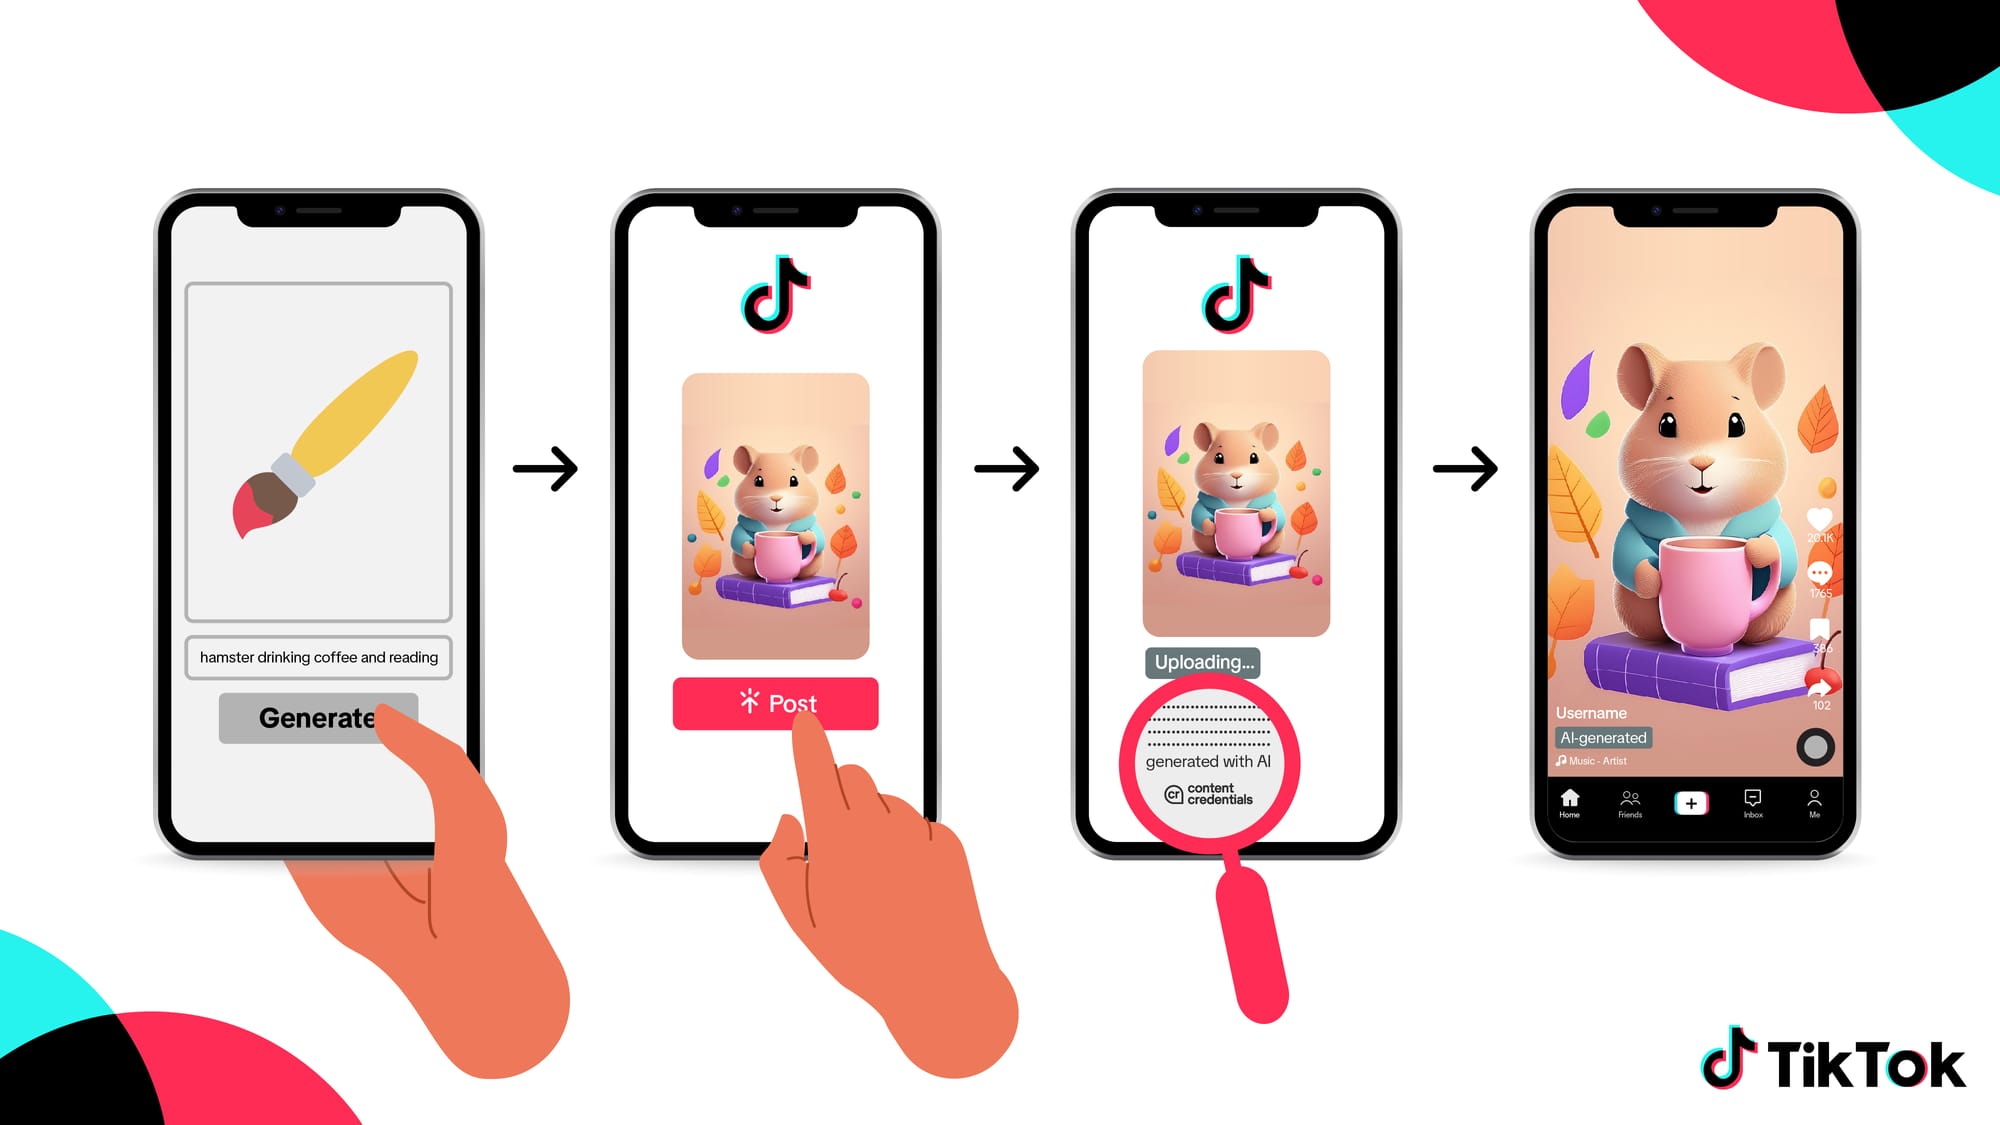 TikTok announced Content Credentials and other AI transparency and literacy measures